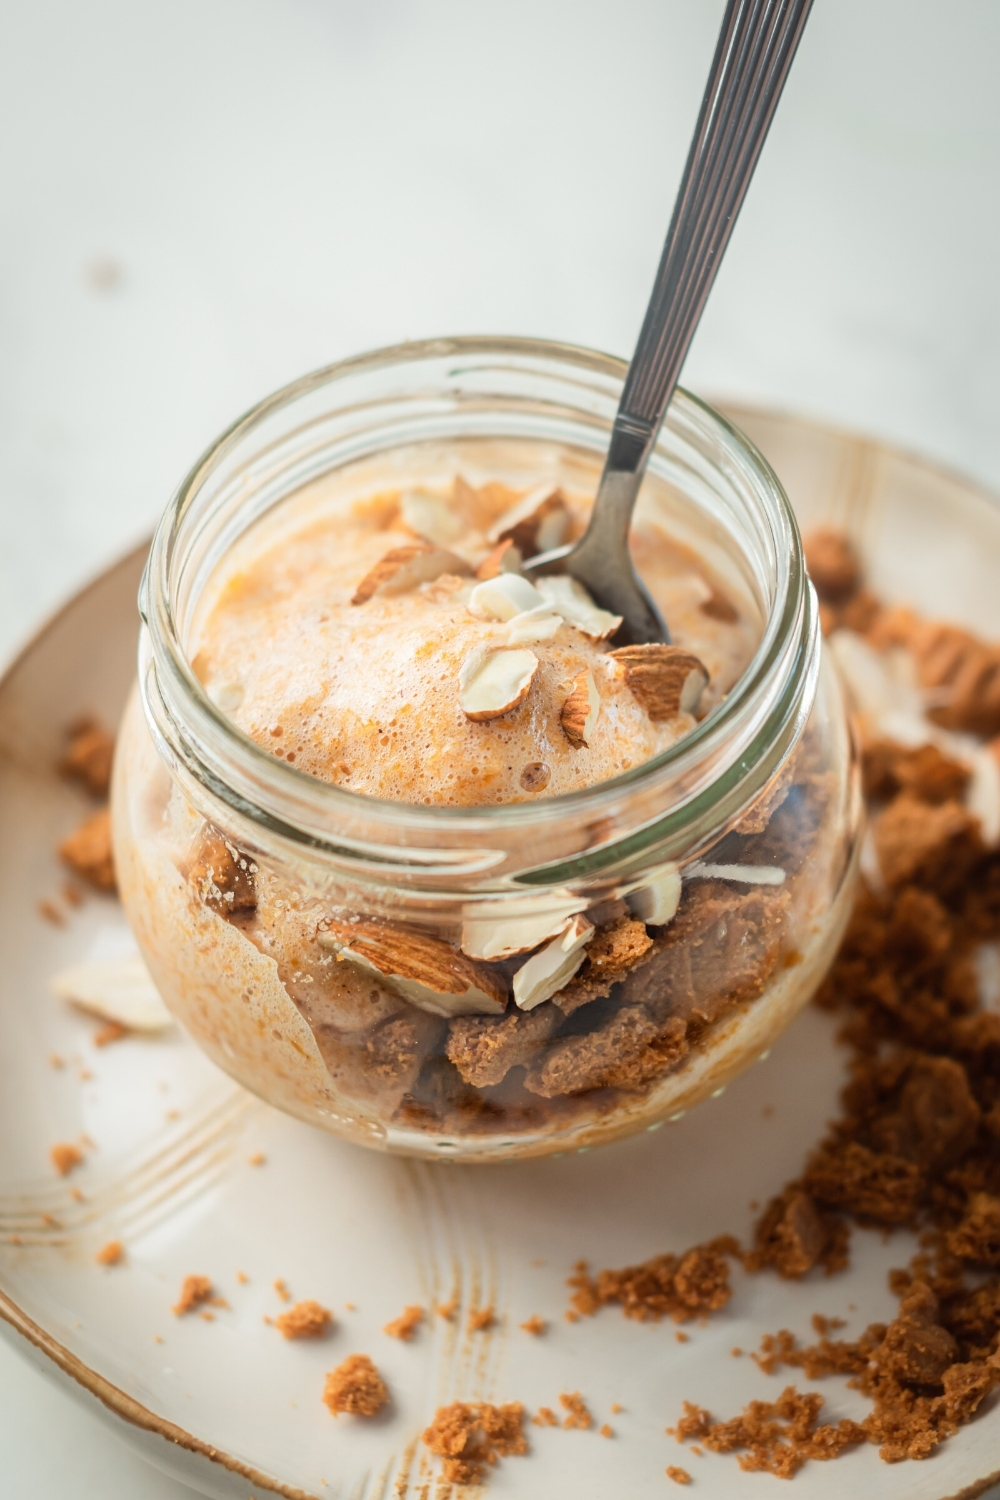 A glass jar filled with pumpkin mousse, almonds, and ginger snaps. The jar of moose is on a white plate and it is surrounded by ginger snap crumbles on the plate.